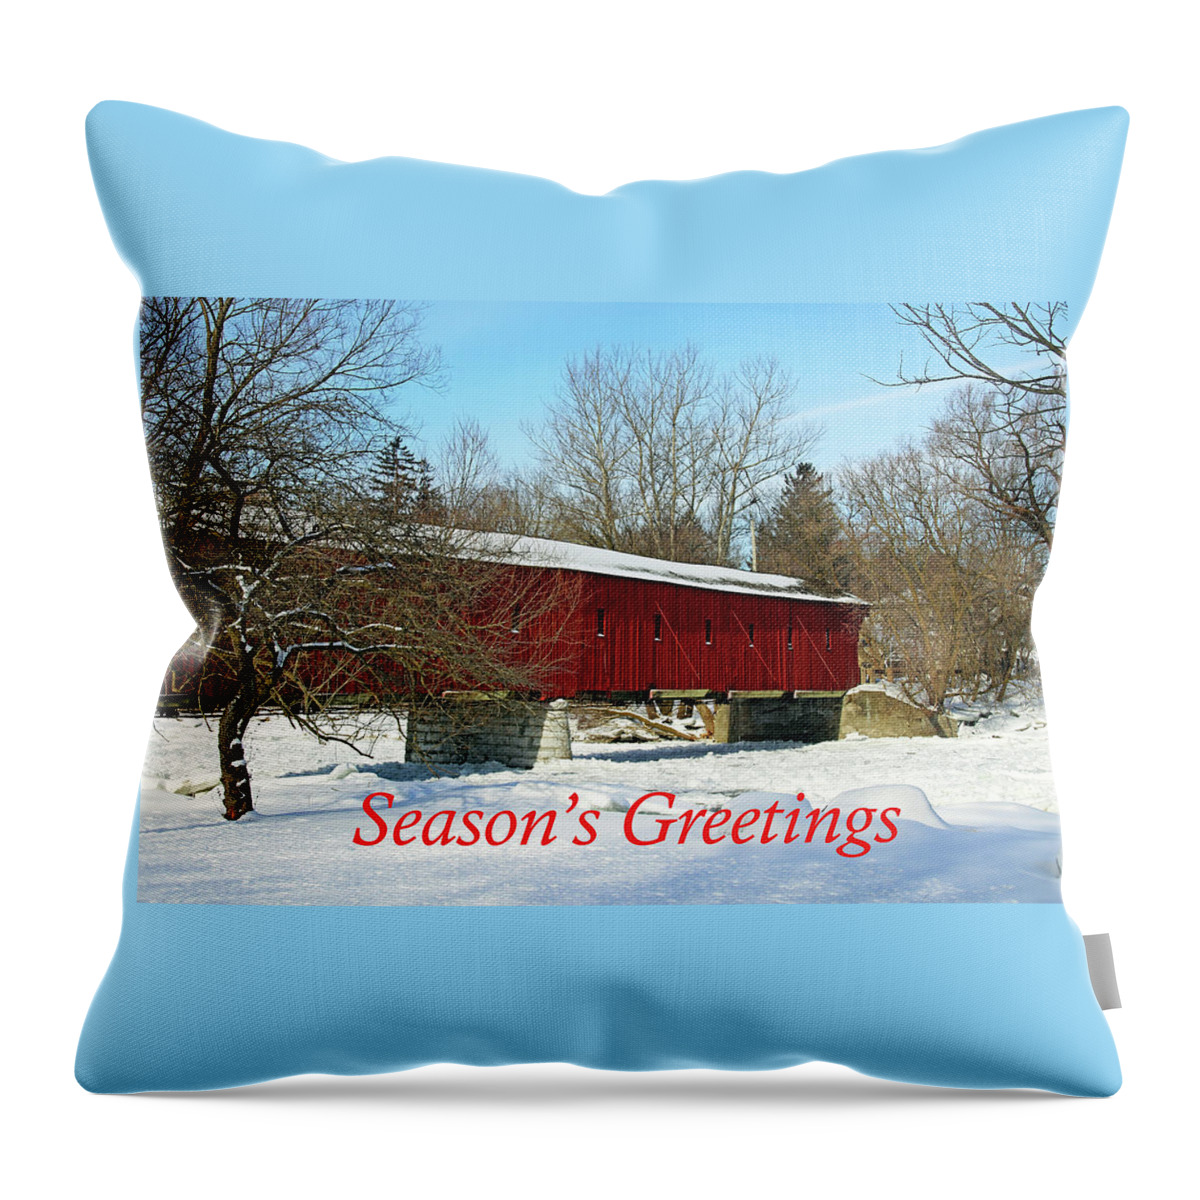 West Montrose Covered Bridge Throw Pillow featuring the photograph Covered Bridge Season's Greetings by Debbie Oppermann